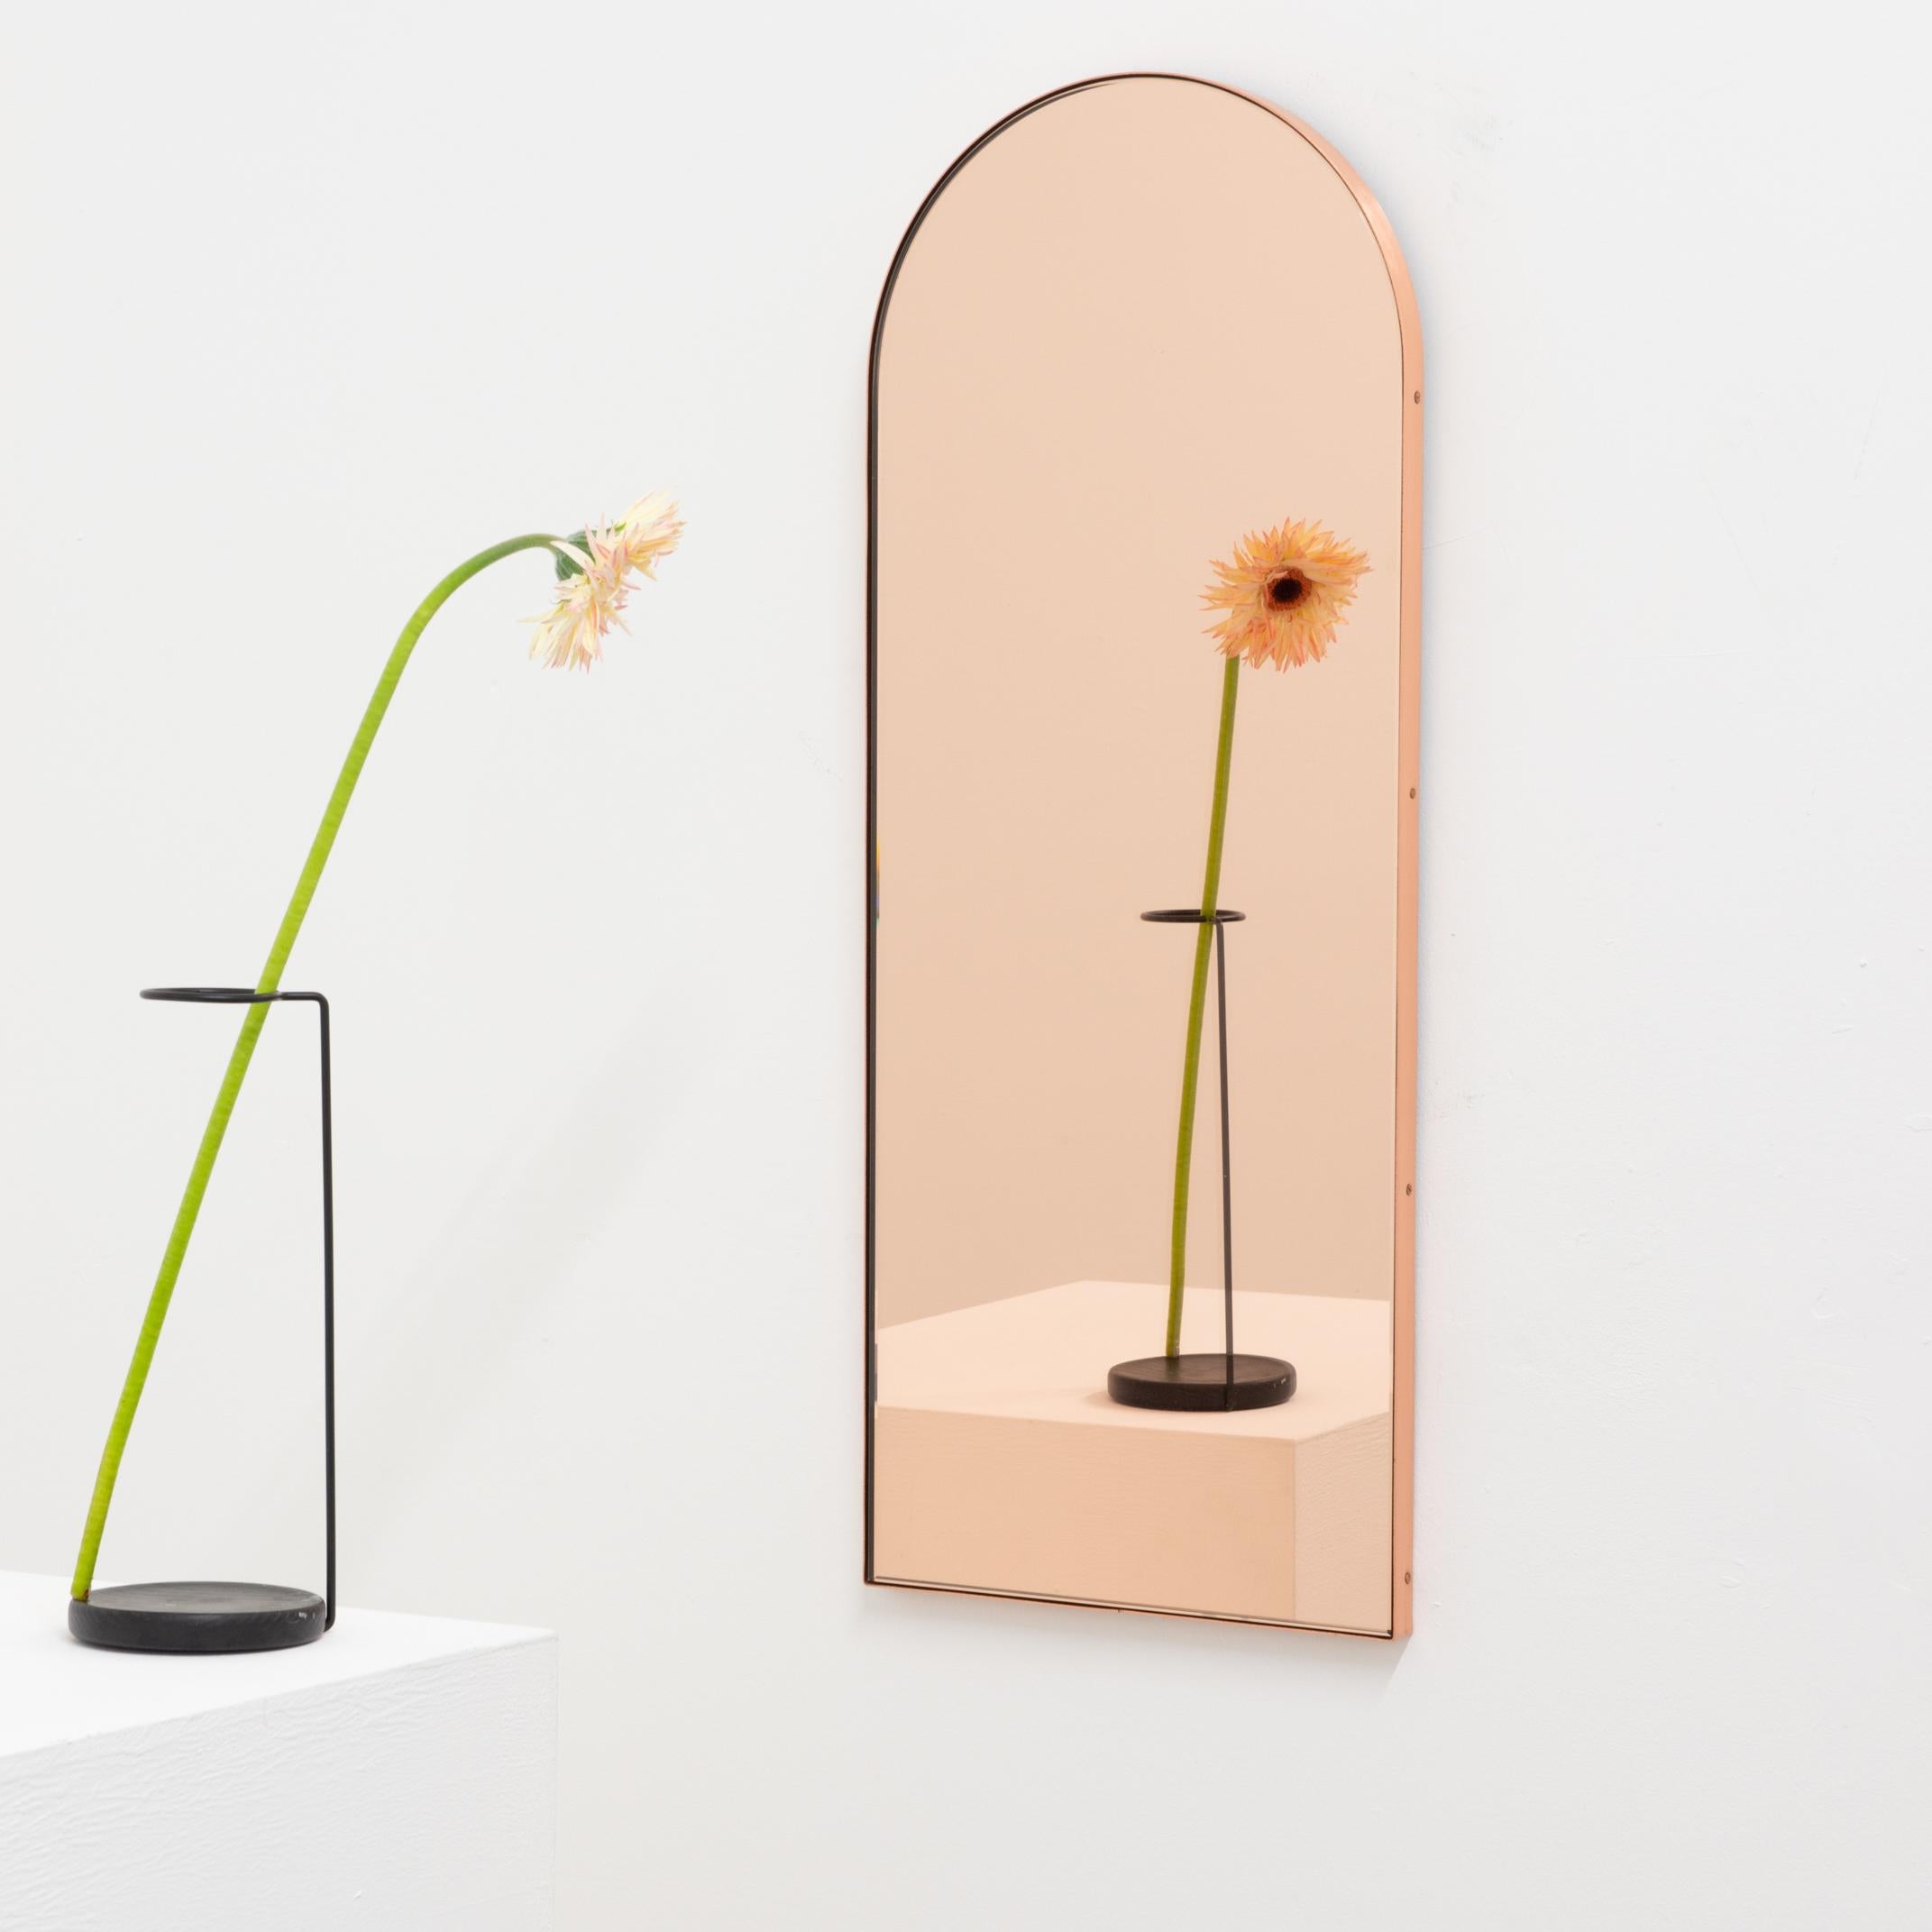 Contemporary Arcus™ arch shaped rose gold / peach mirror with an elegant solid brushed copper frame. Designed and made in London, UK.

Our mirrors are designed with an integrated French cleat (split batten) system that ensures the mirror is securely